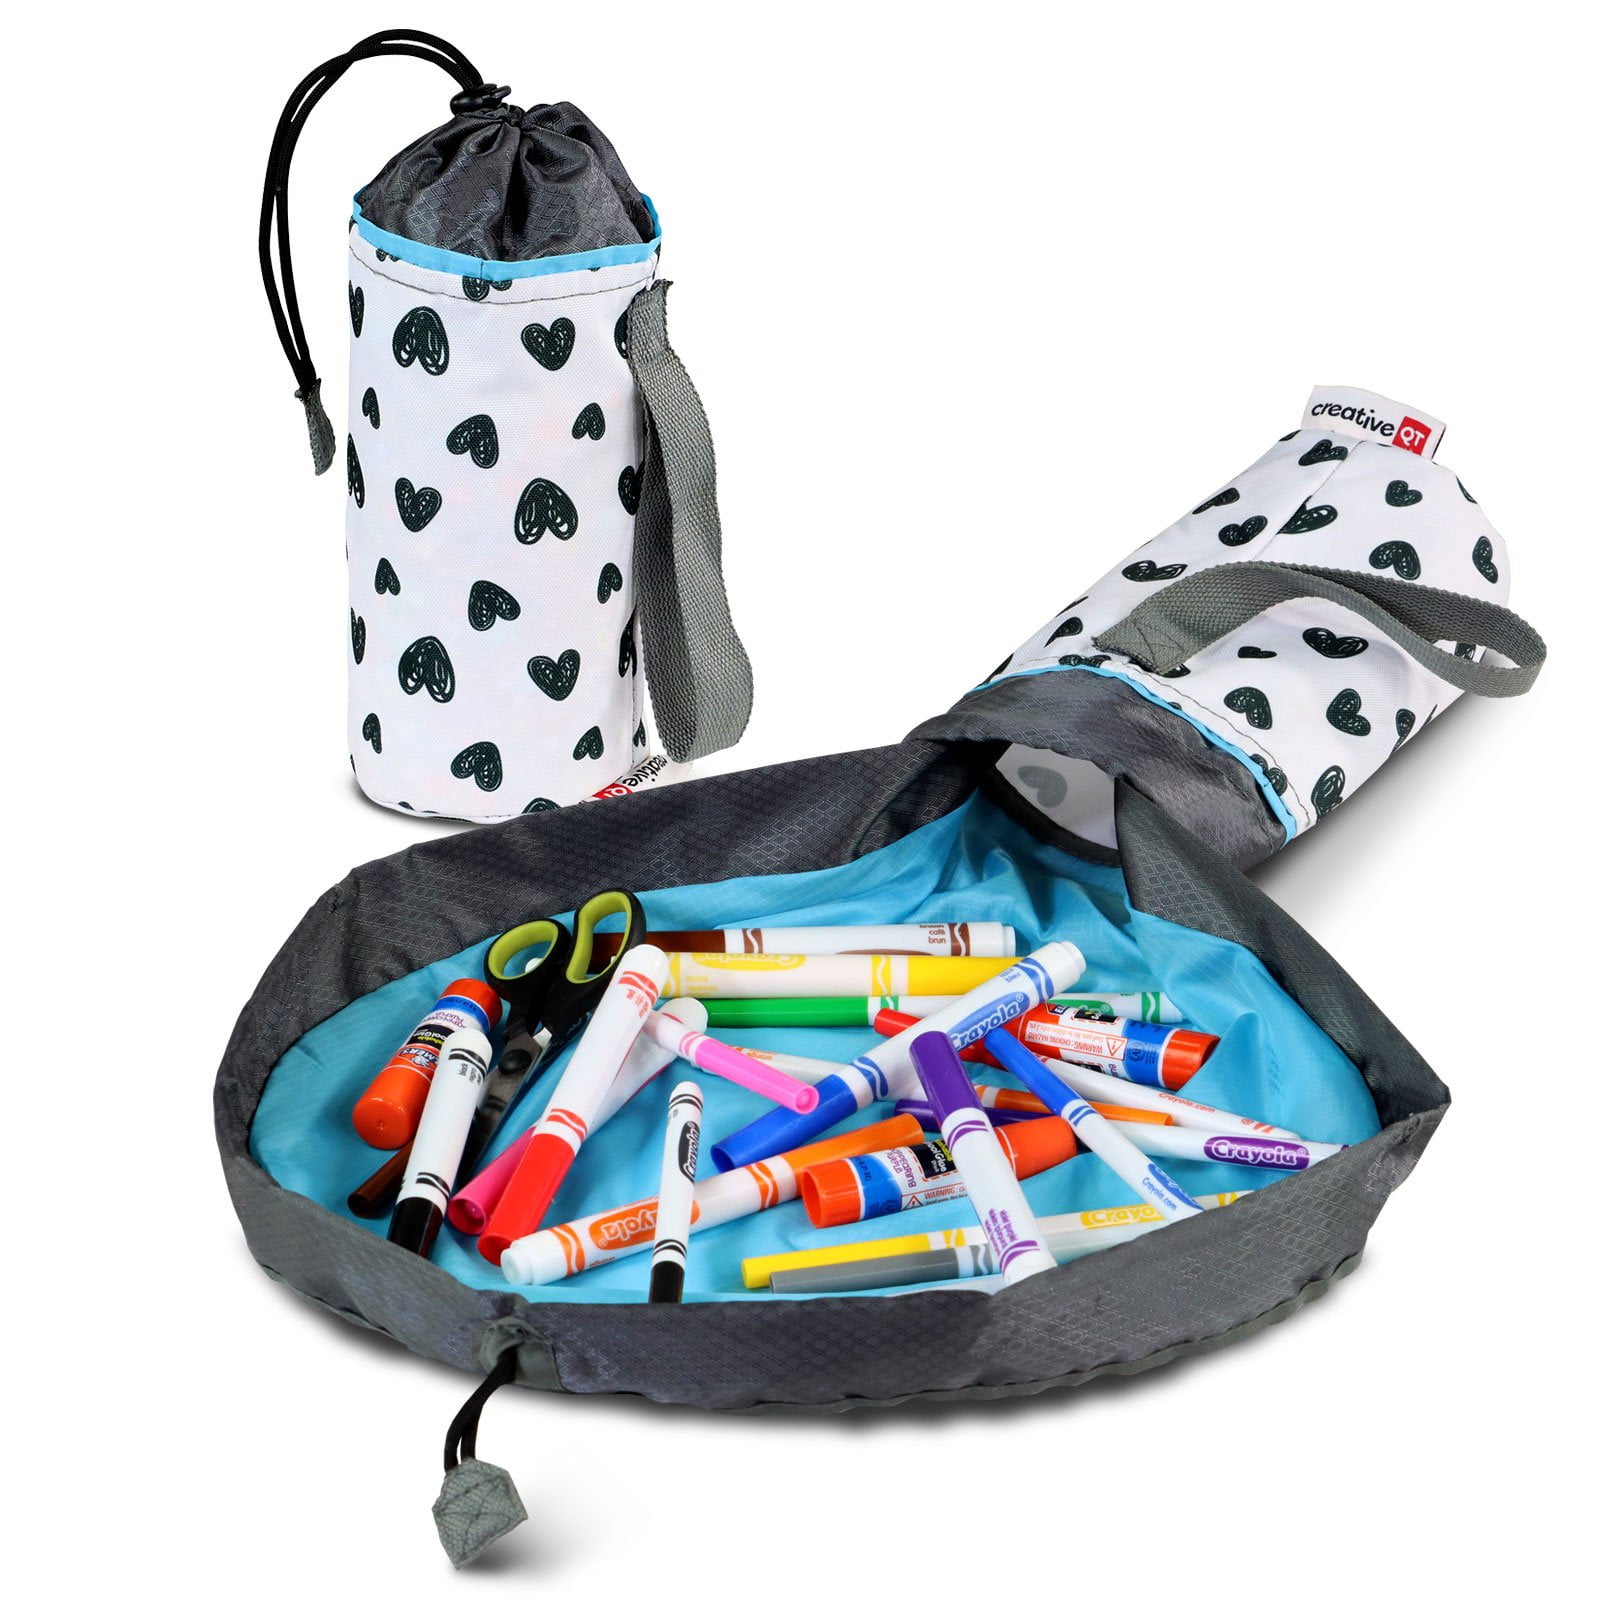 Creative QT Kids Toy Storage or Craft Storage Bag with Slide Away Play Mat  Surface 